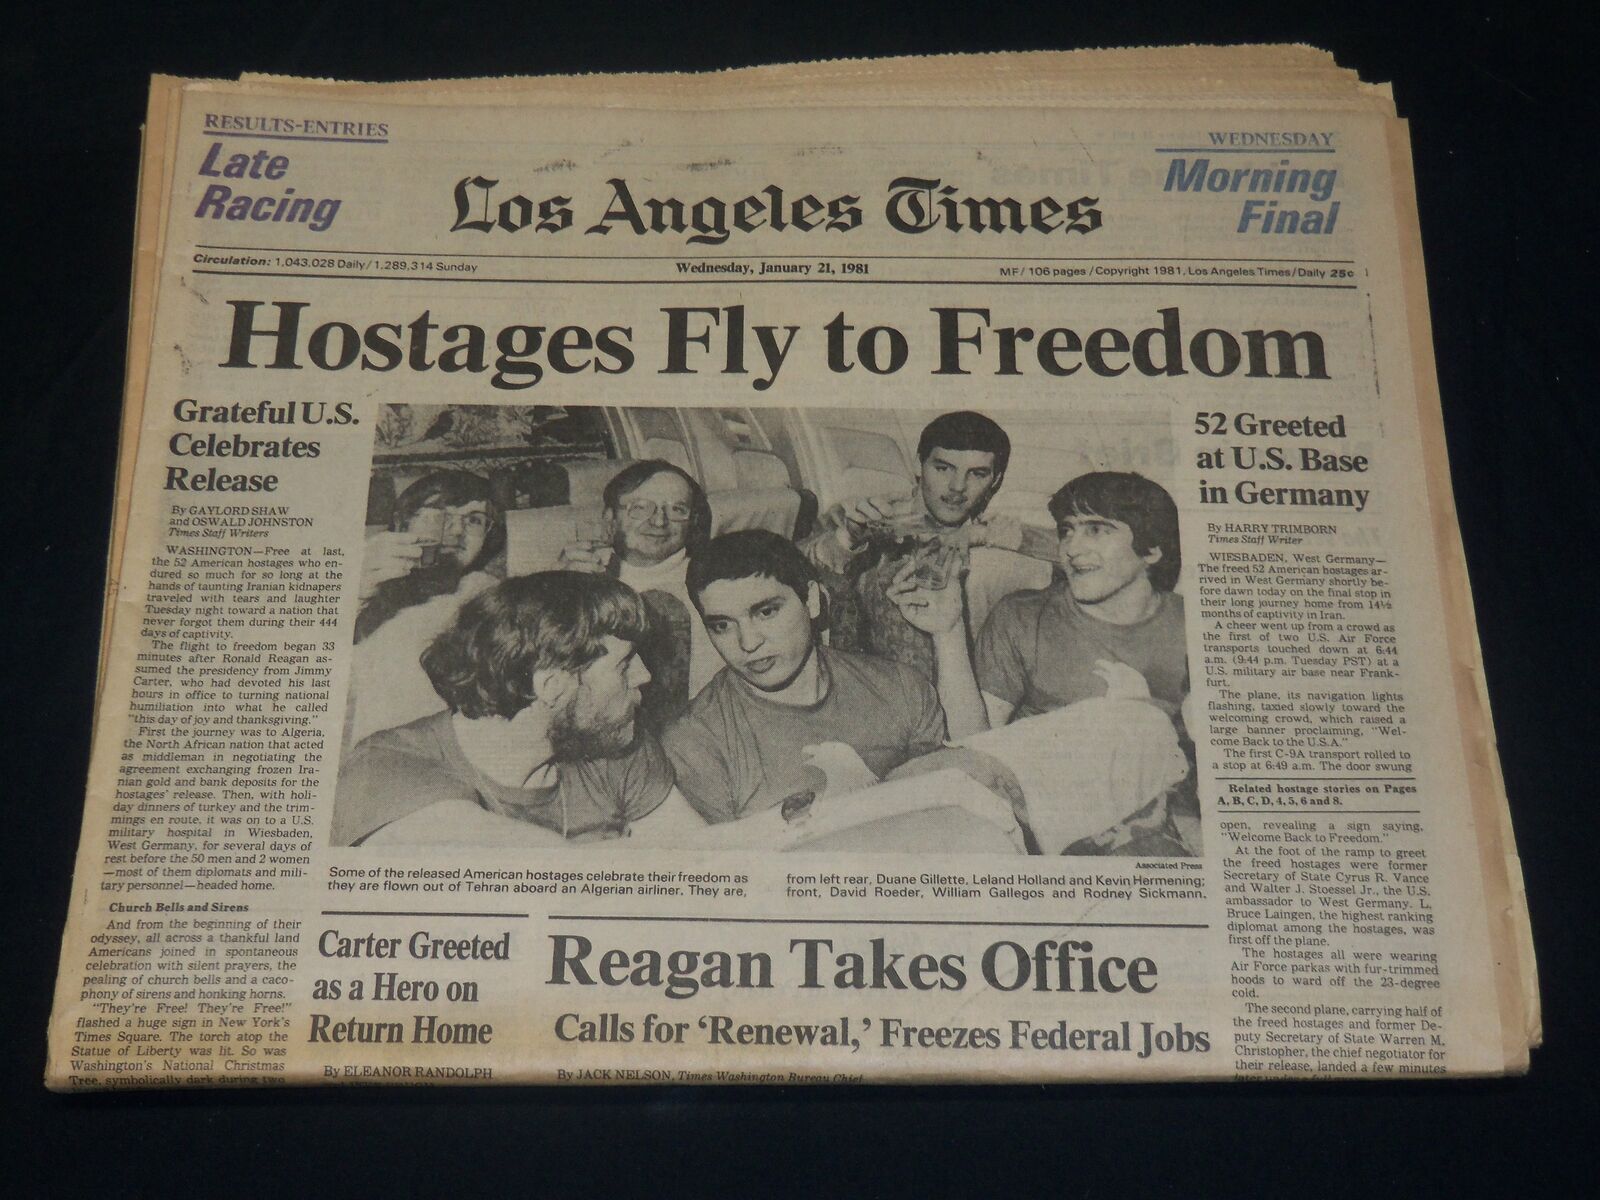 1981 JANUARY 21 LOS ANGELES TIMES NEWSPAPER - FLY TO FREEDOM - NP 4910